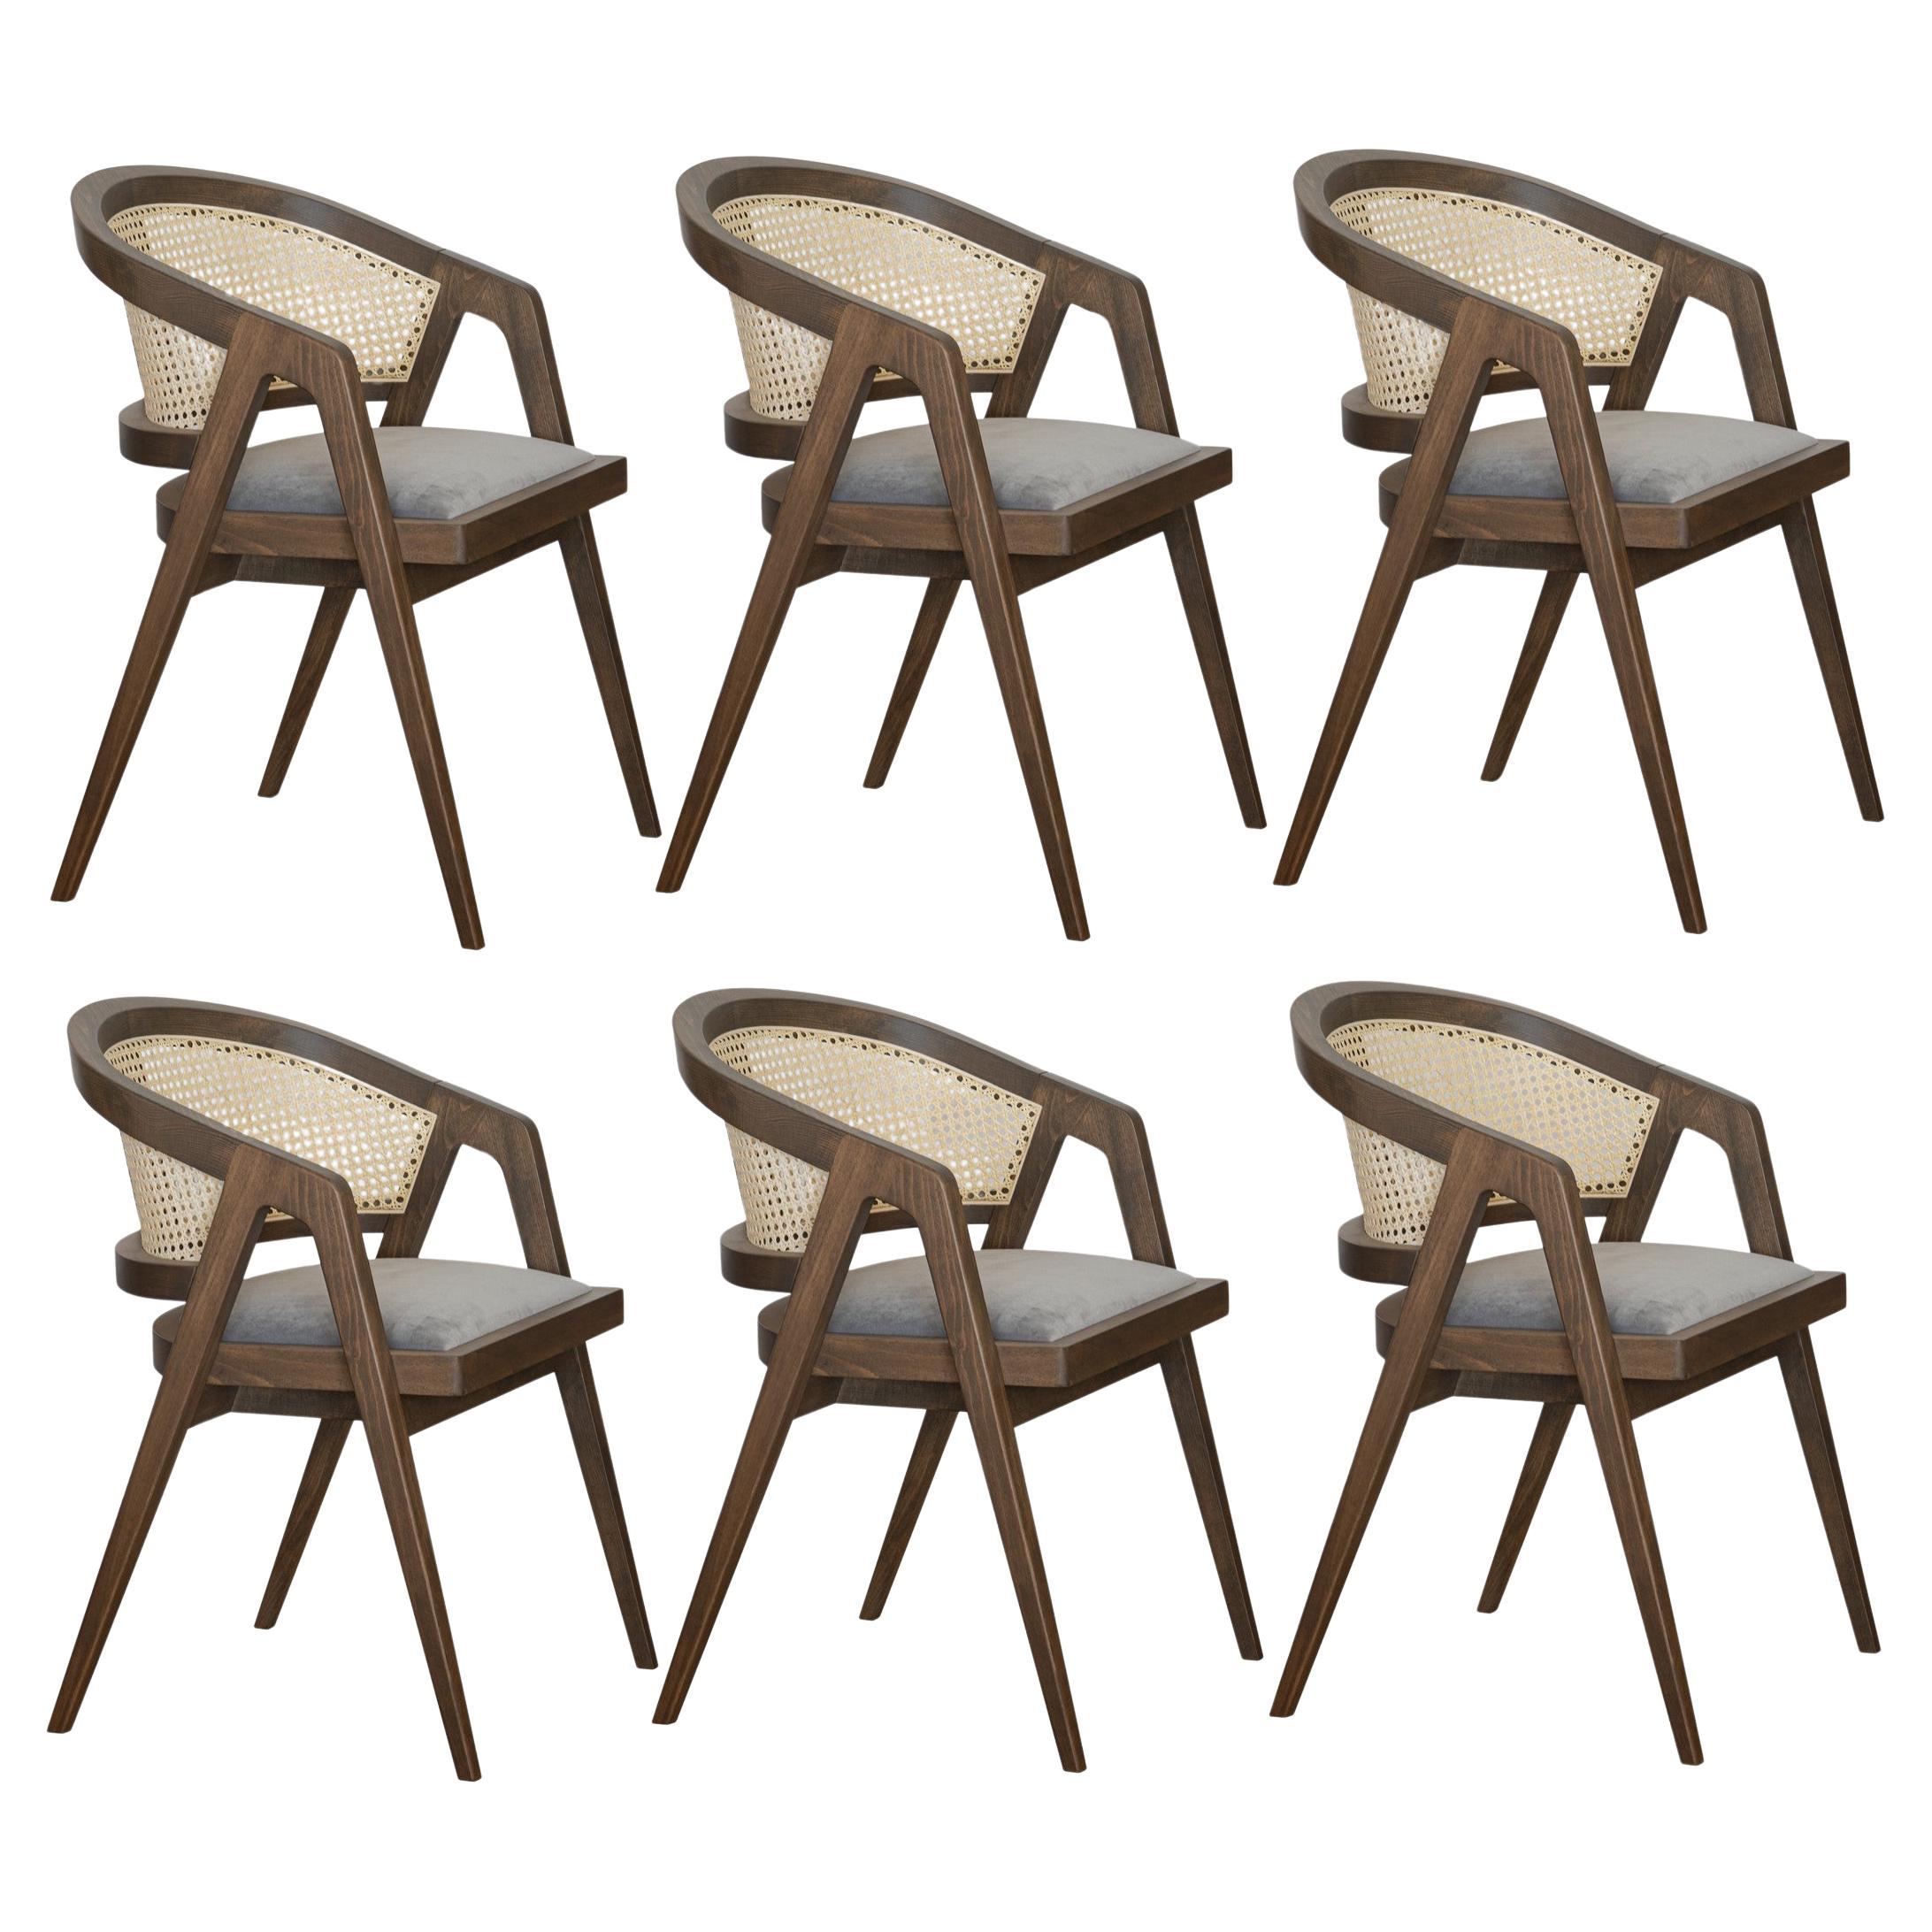 Midcentury Modern Style Dining Chairs in Natural Cane, Set of 8 For Sale